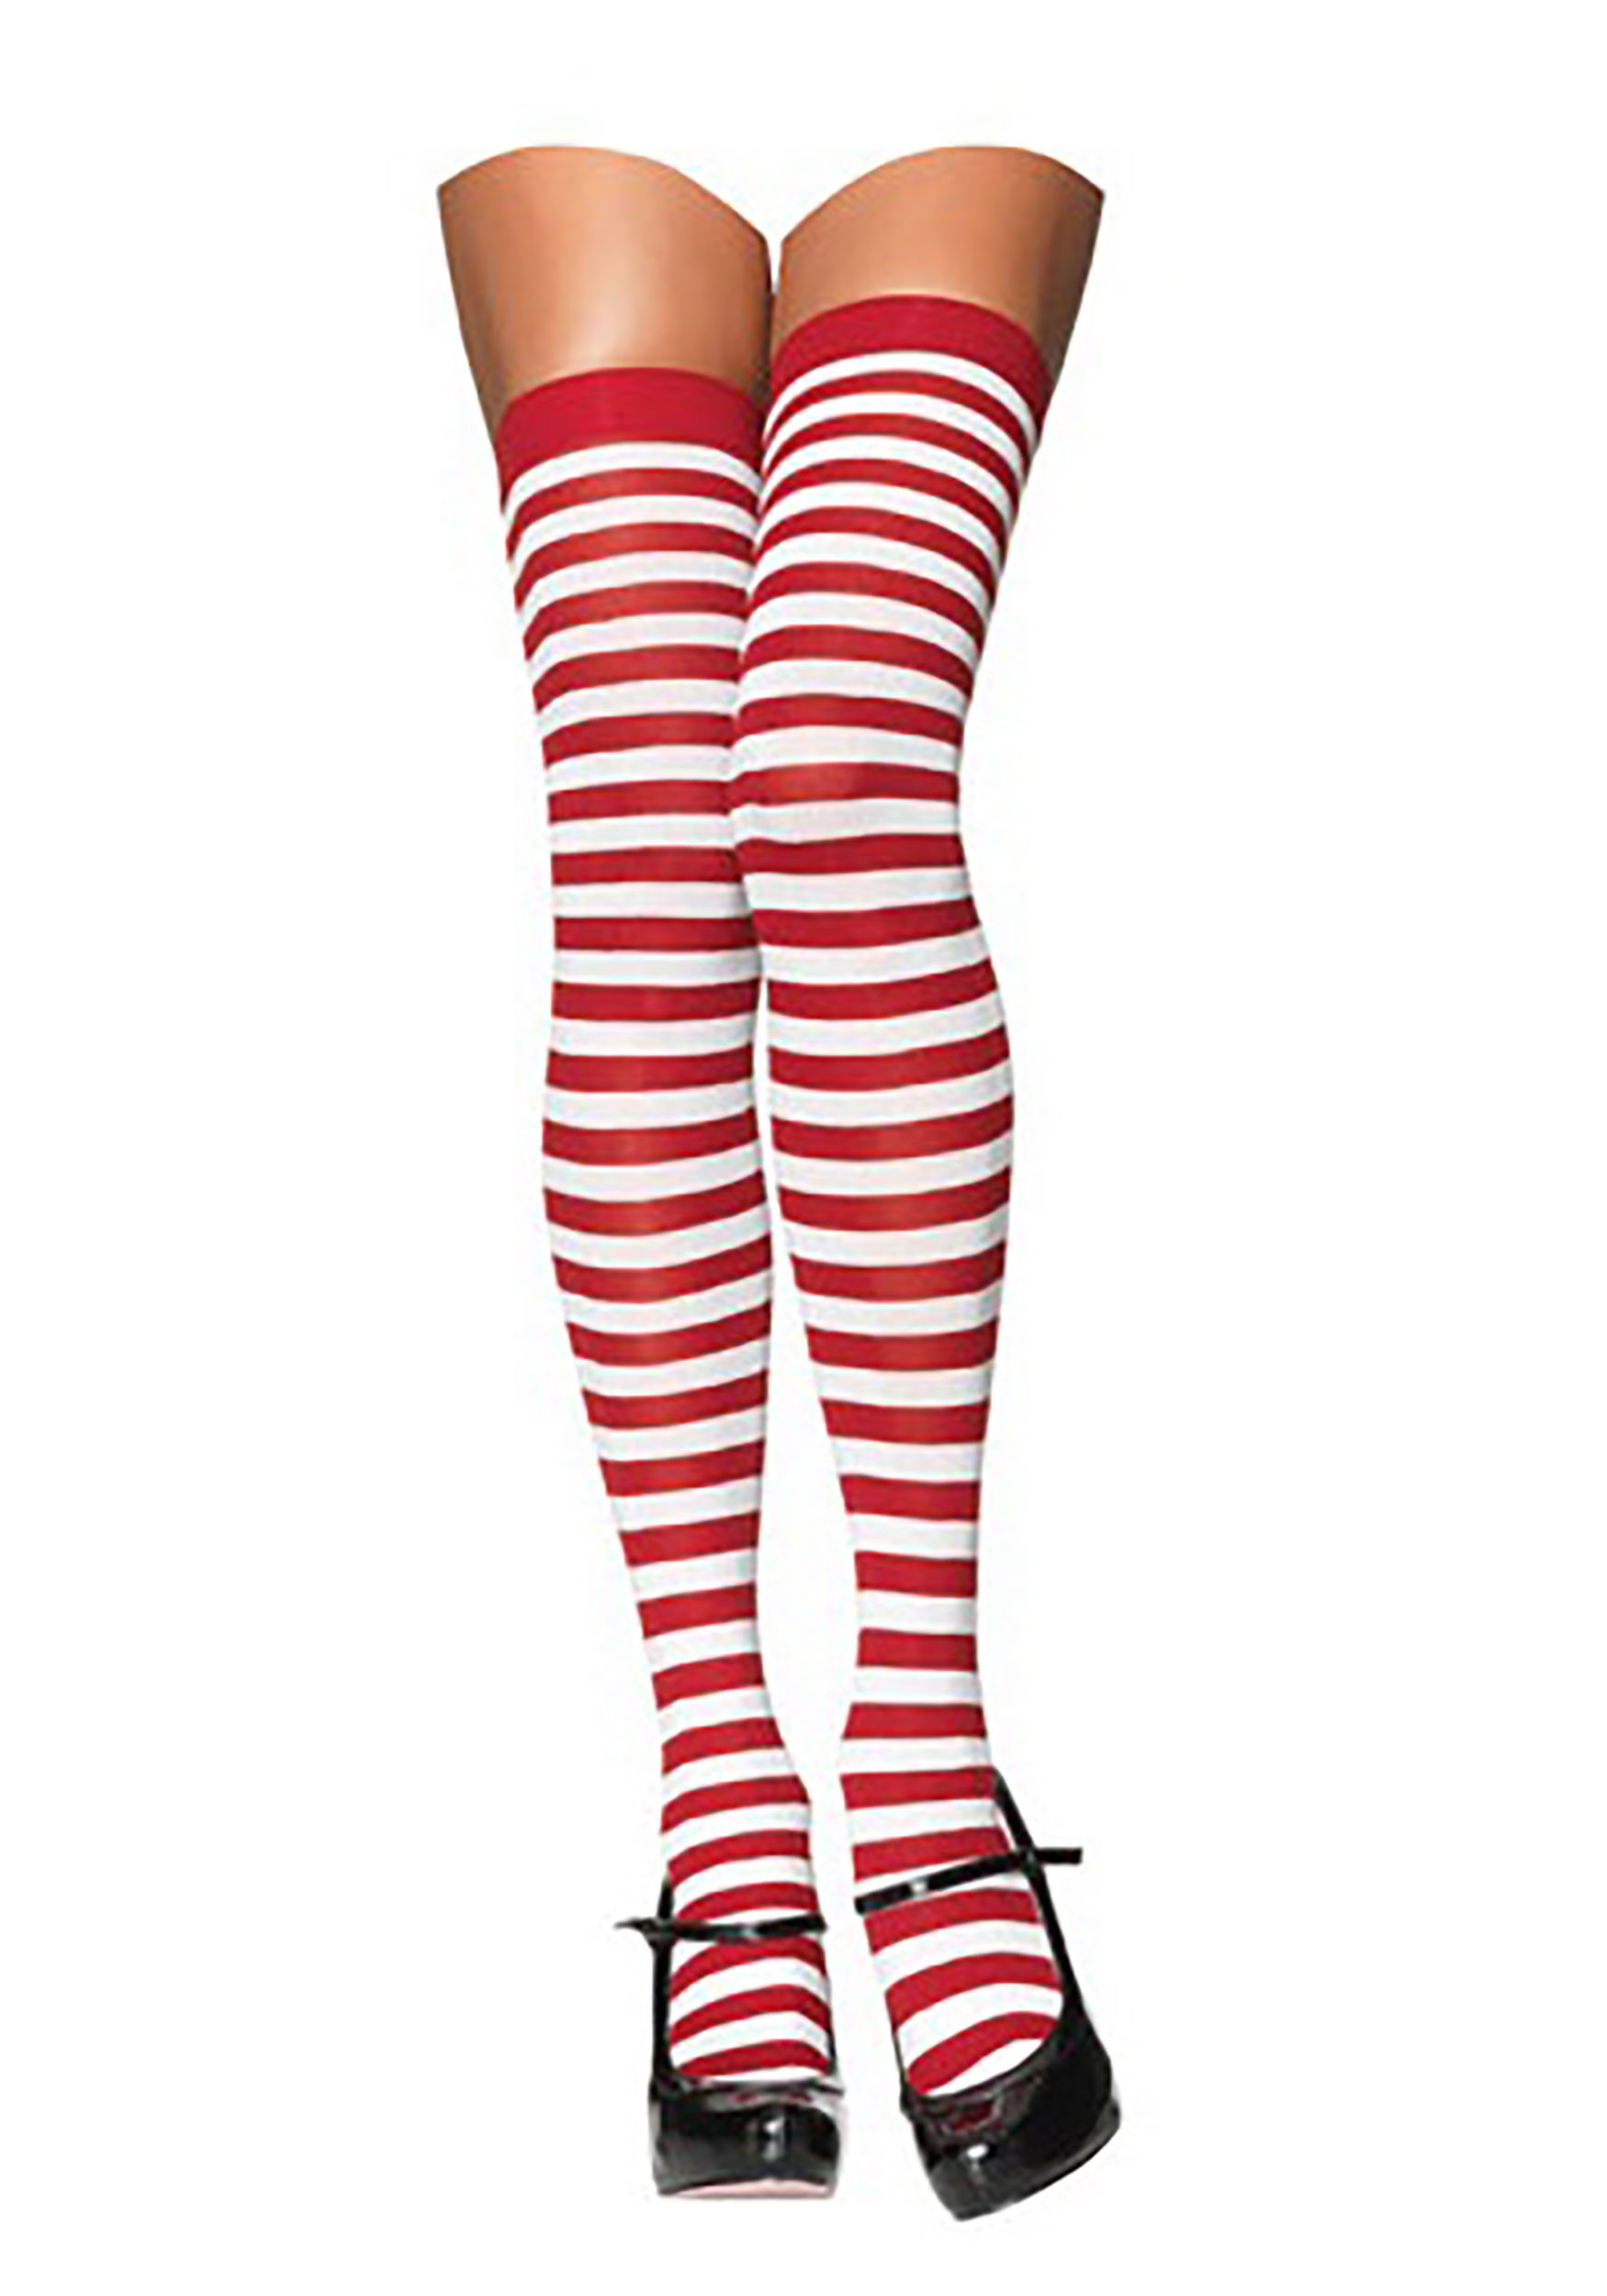 Candy Cane Striped Womens Stockings